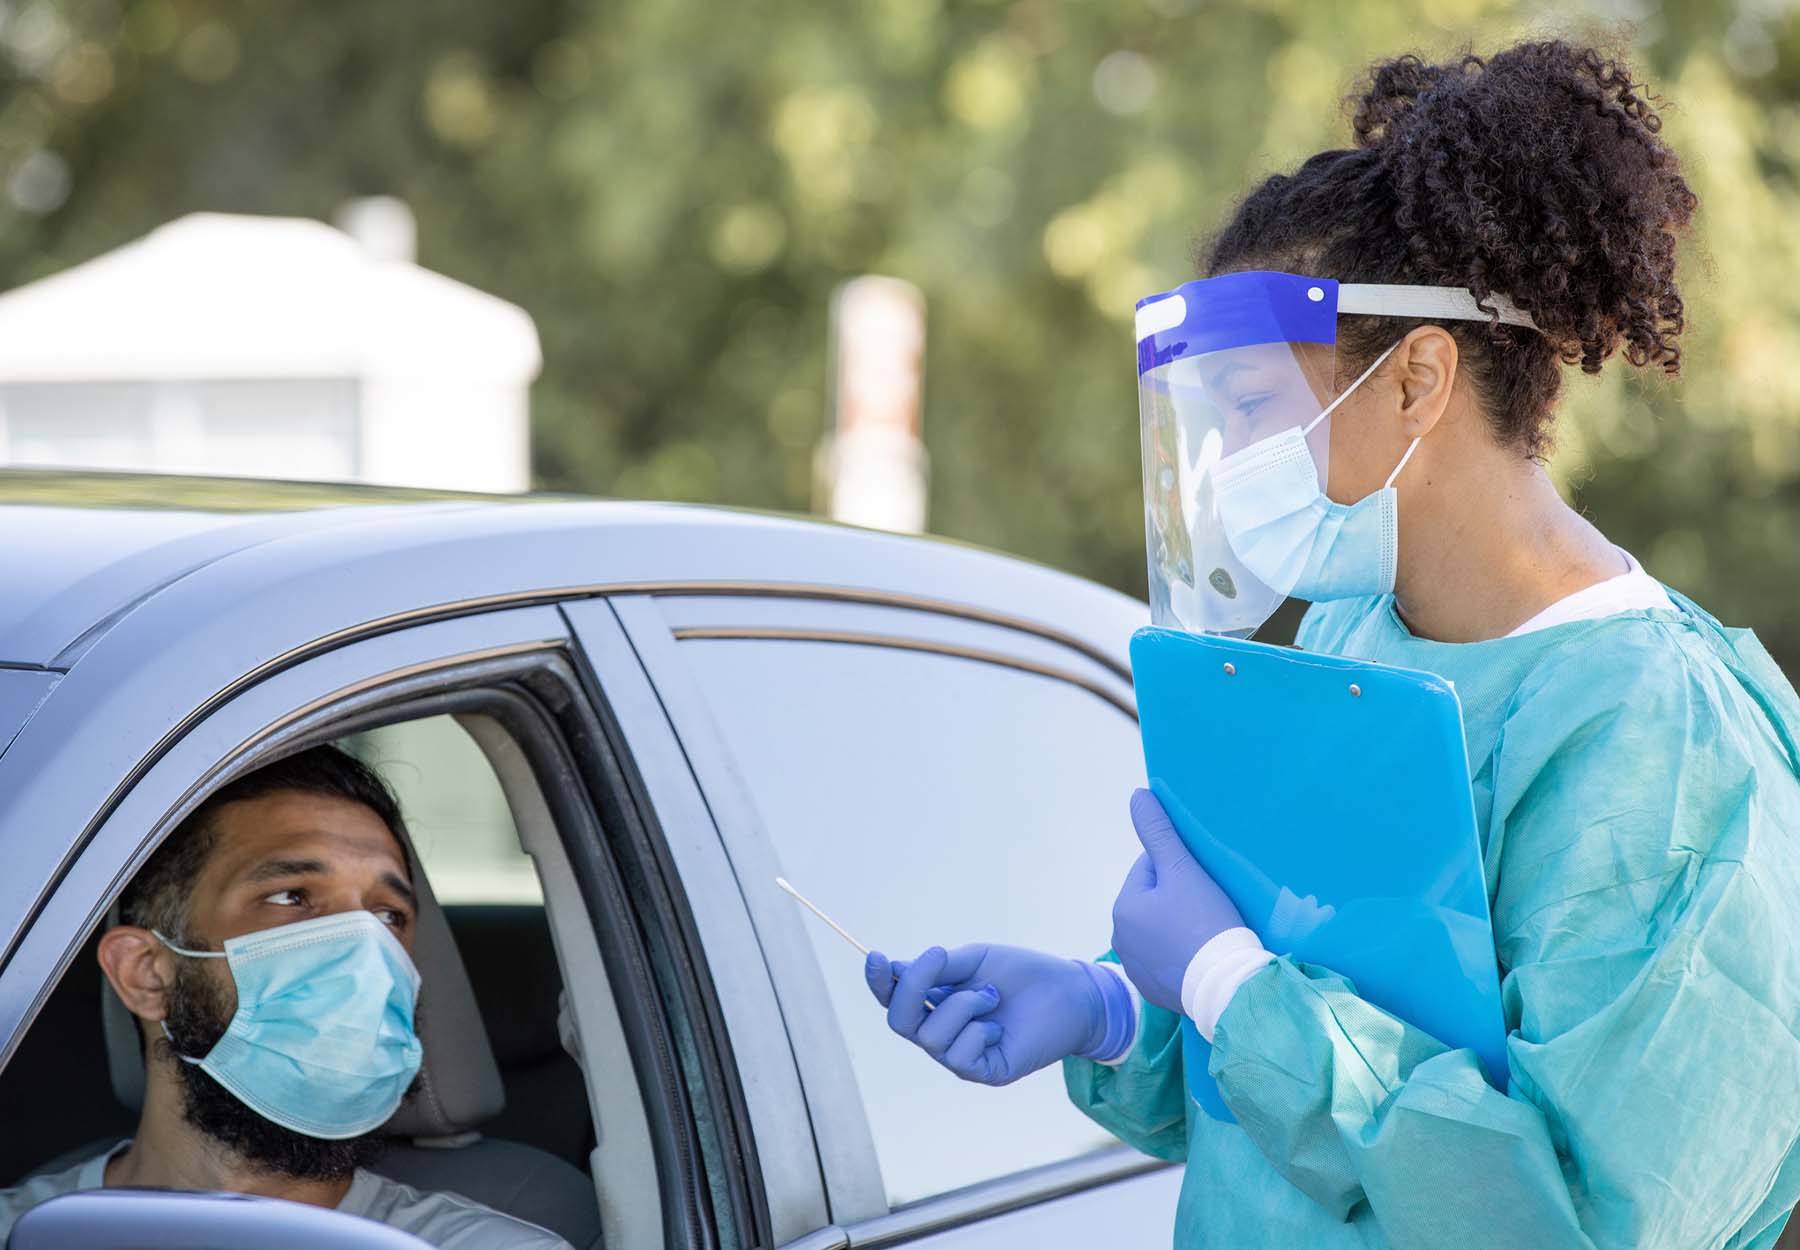 A stock image showing a drive through testing site for Covid-19 patients